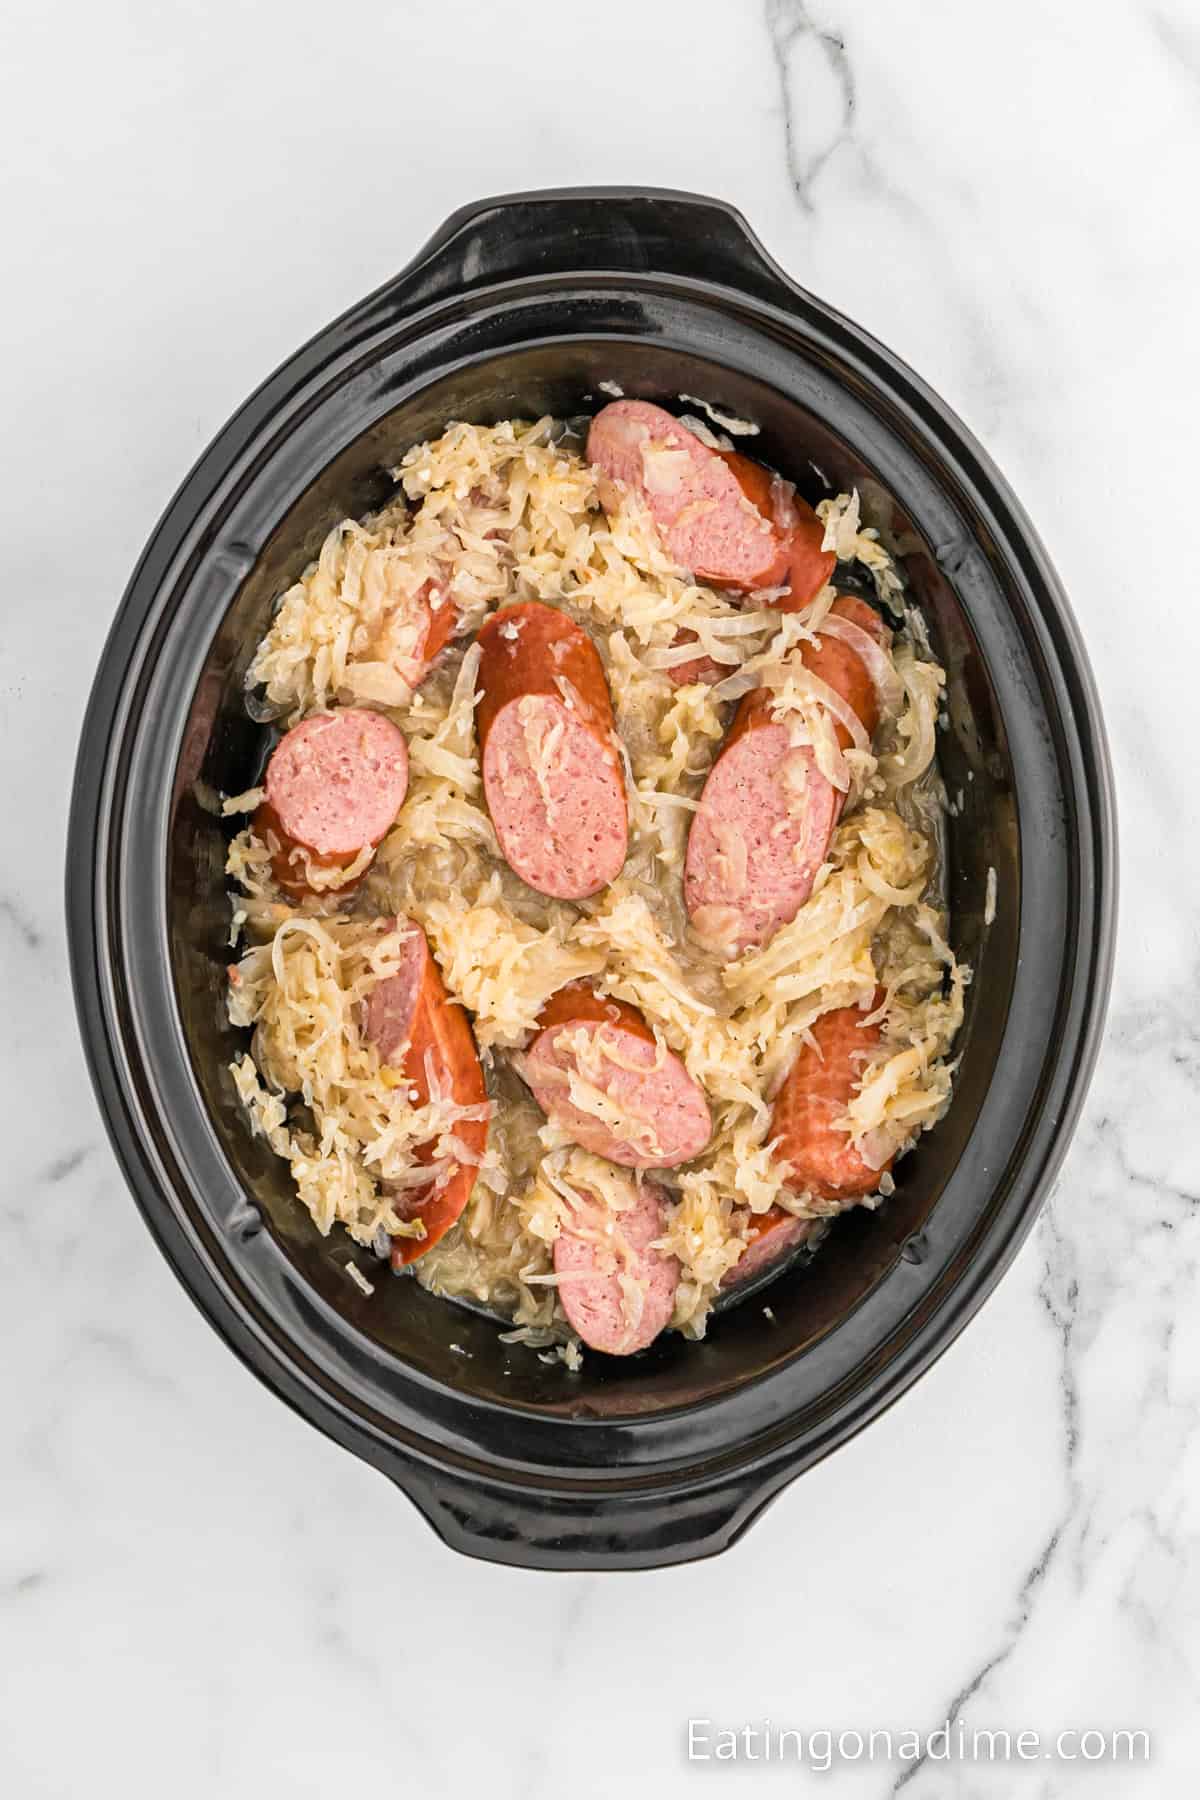 A black slow cooker filled with sliced kielbasa and shredded sauerkraut. The sausages are cooked and slightly browned, scattered among the pale sauerkraut. The slow cooker is placed on a white marble surface, creating the perfect Slow Cooker Kielbasa and Sauerkraut dish.